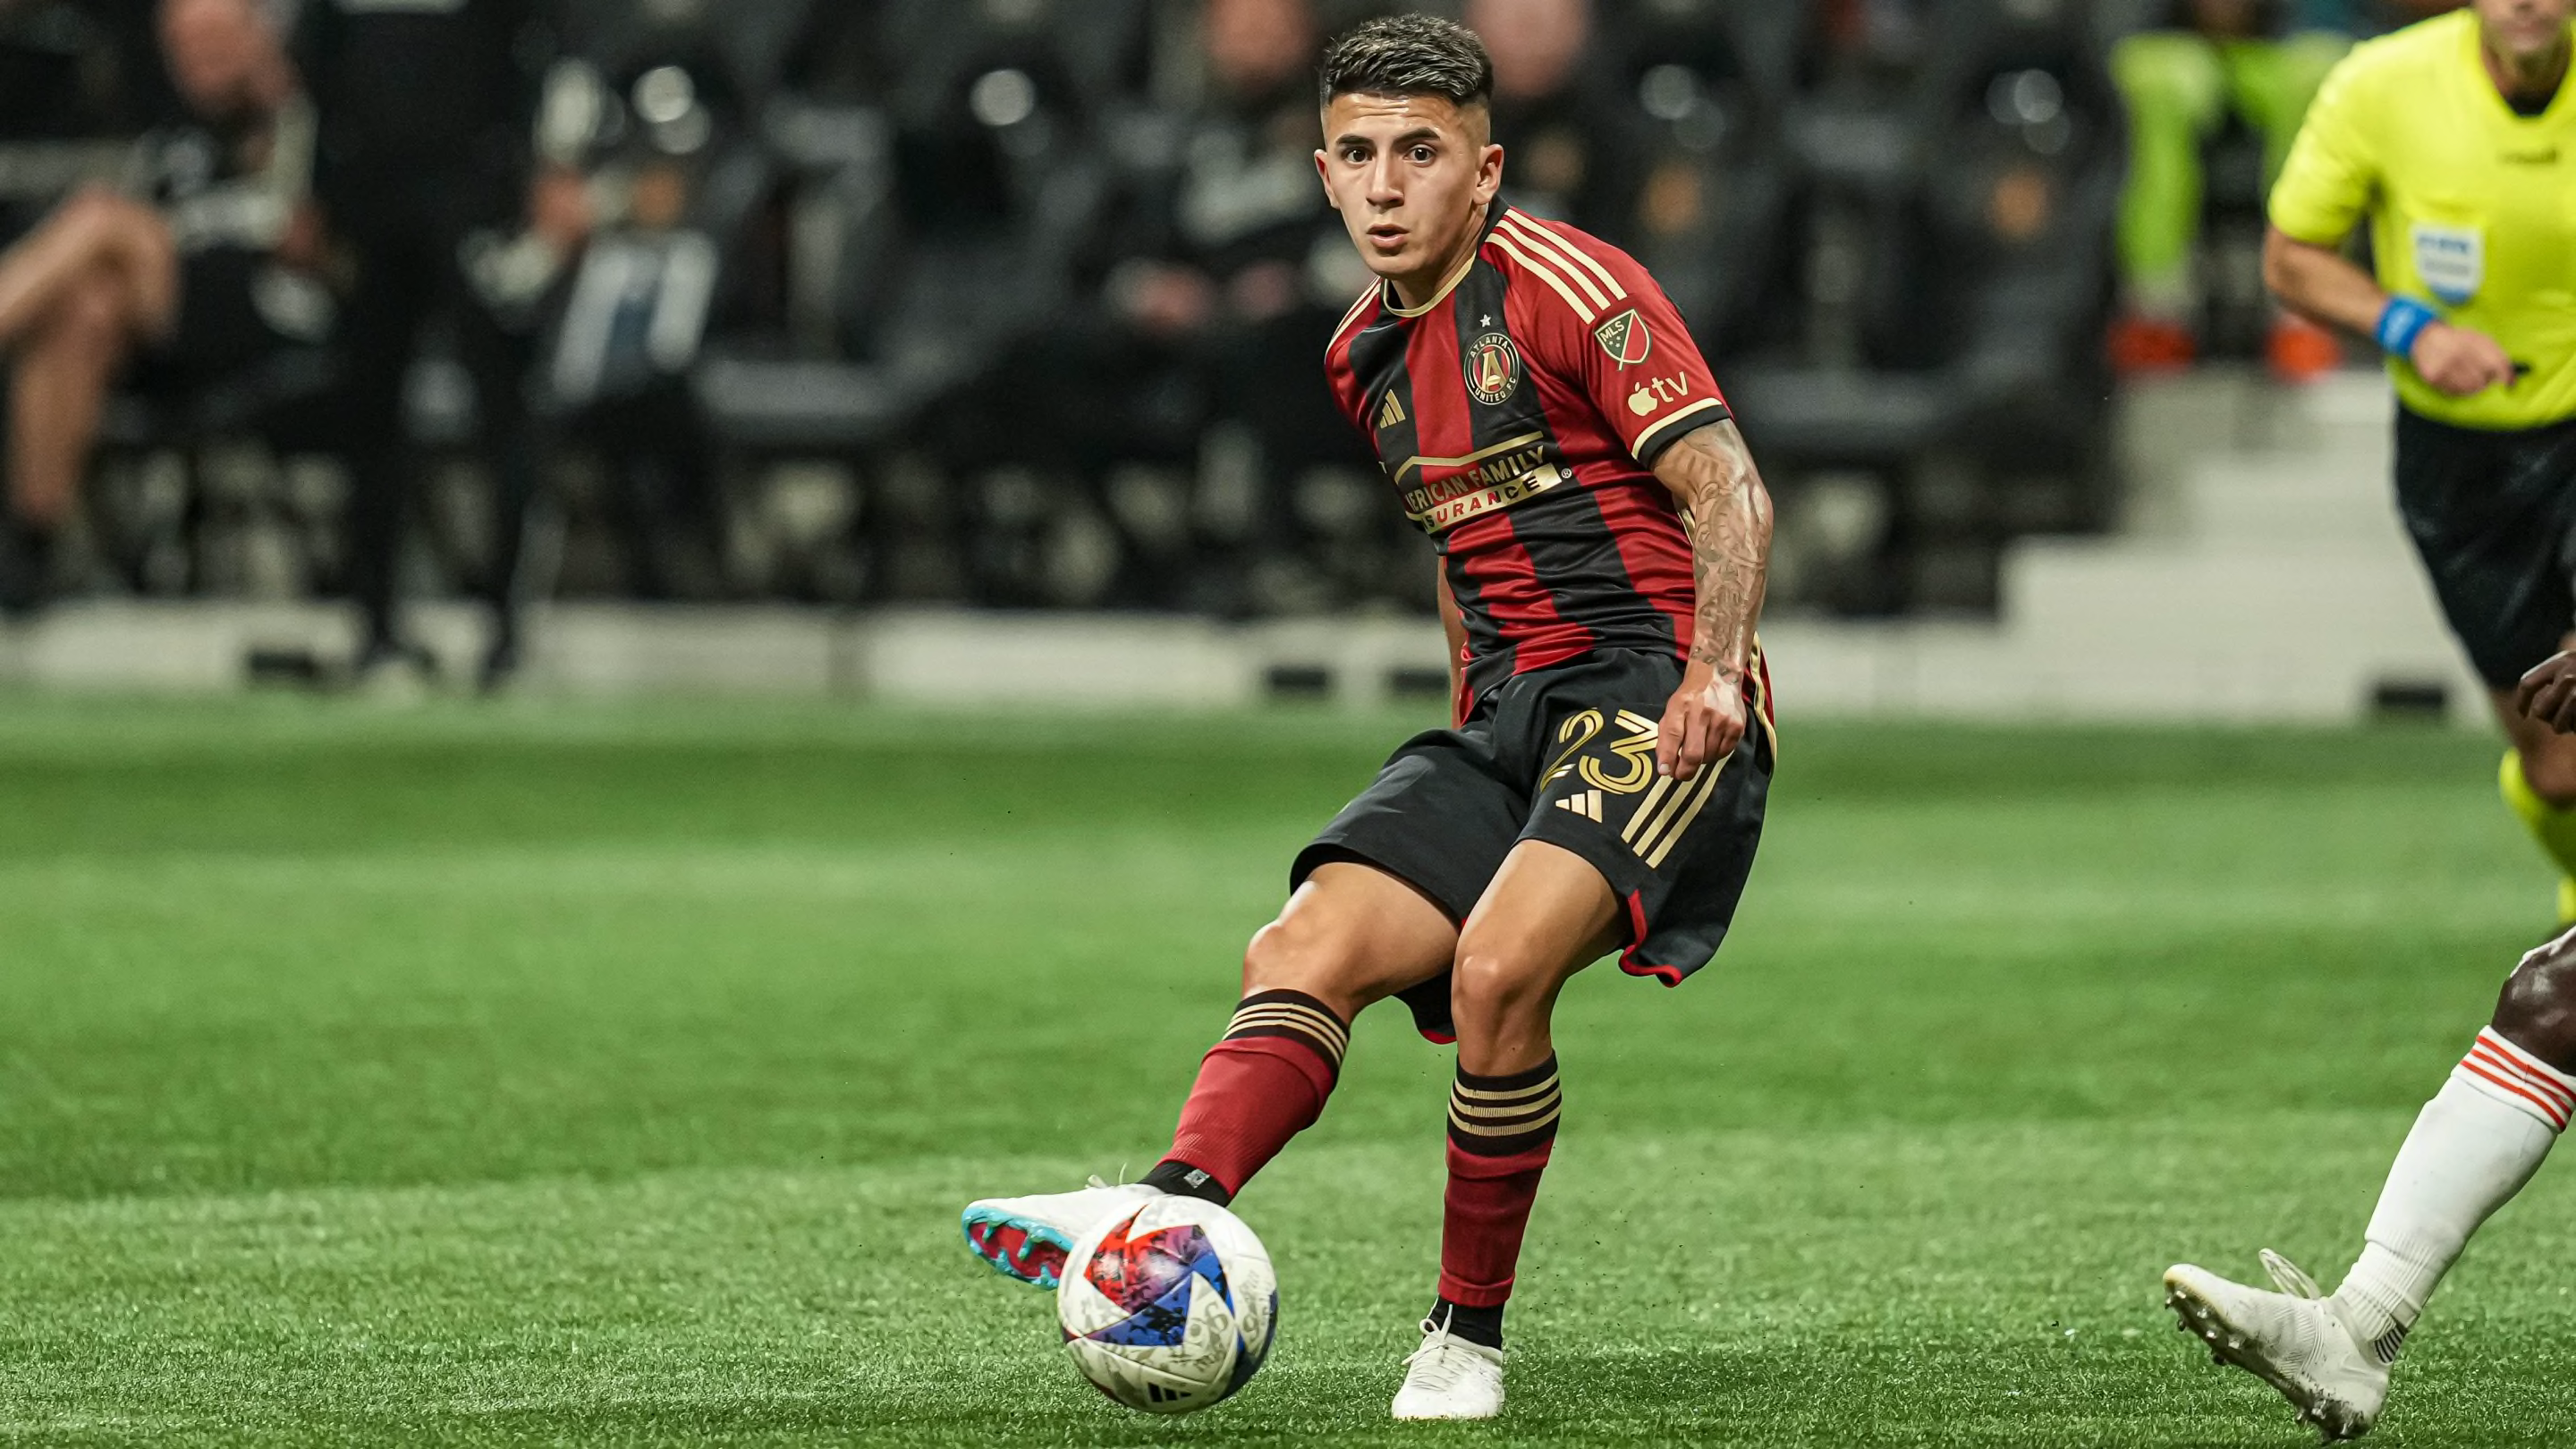 Top five players that could leave MLS this summer - ranked 